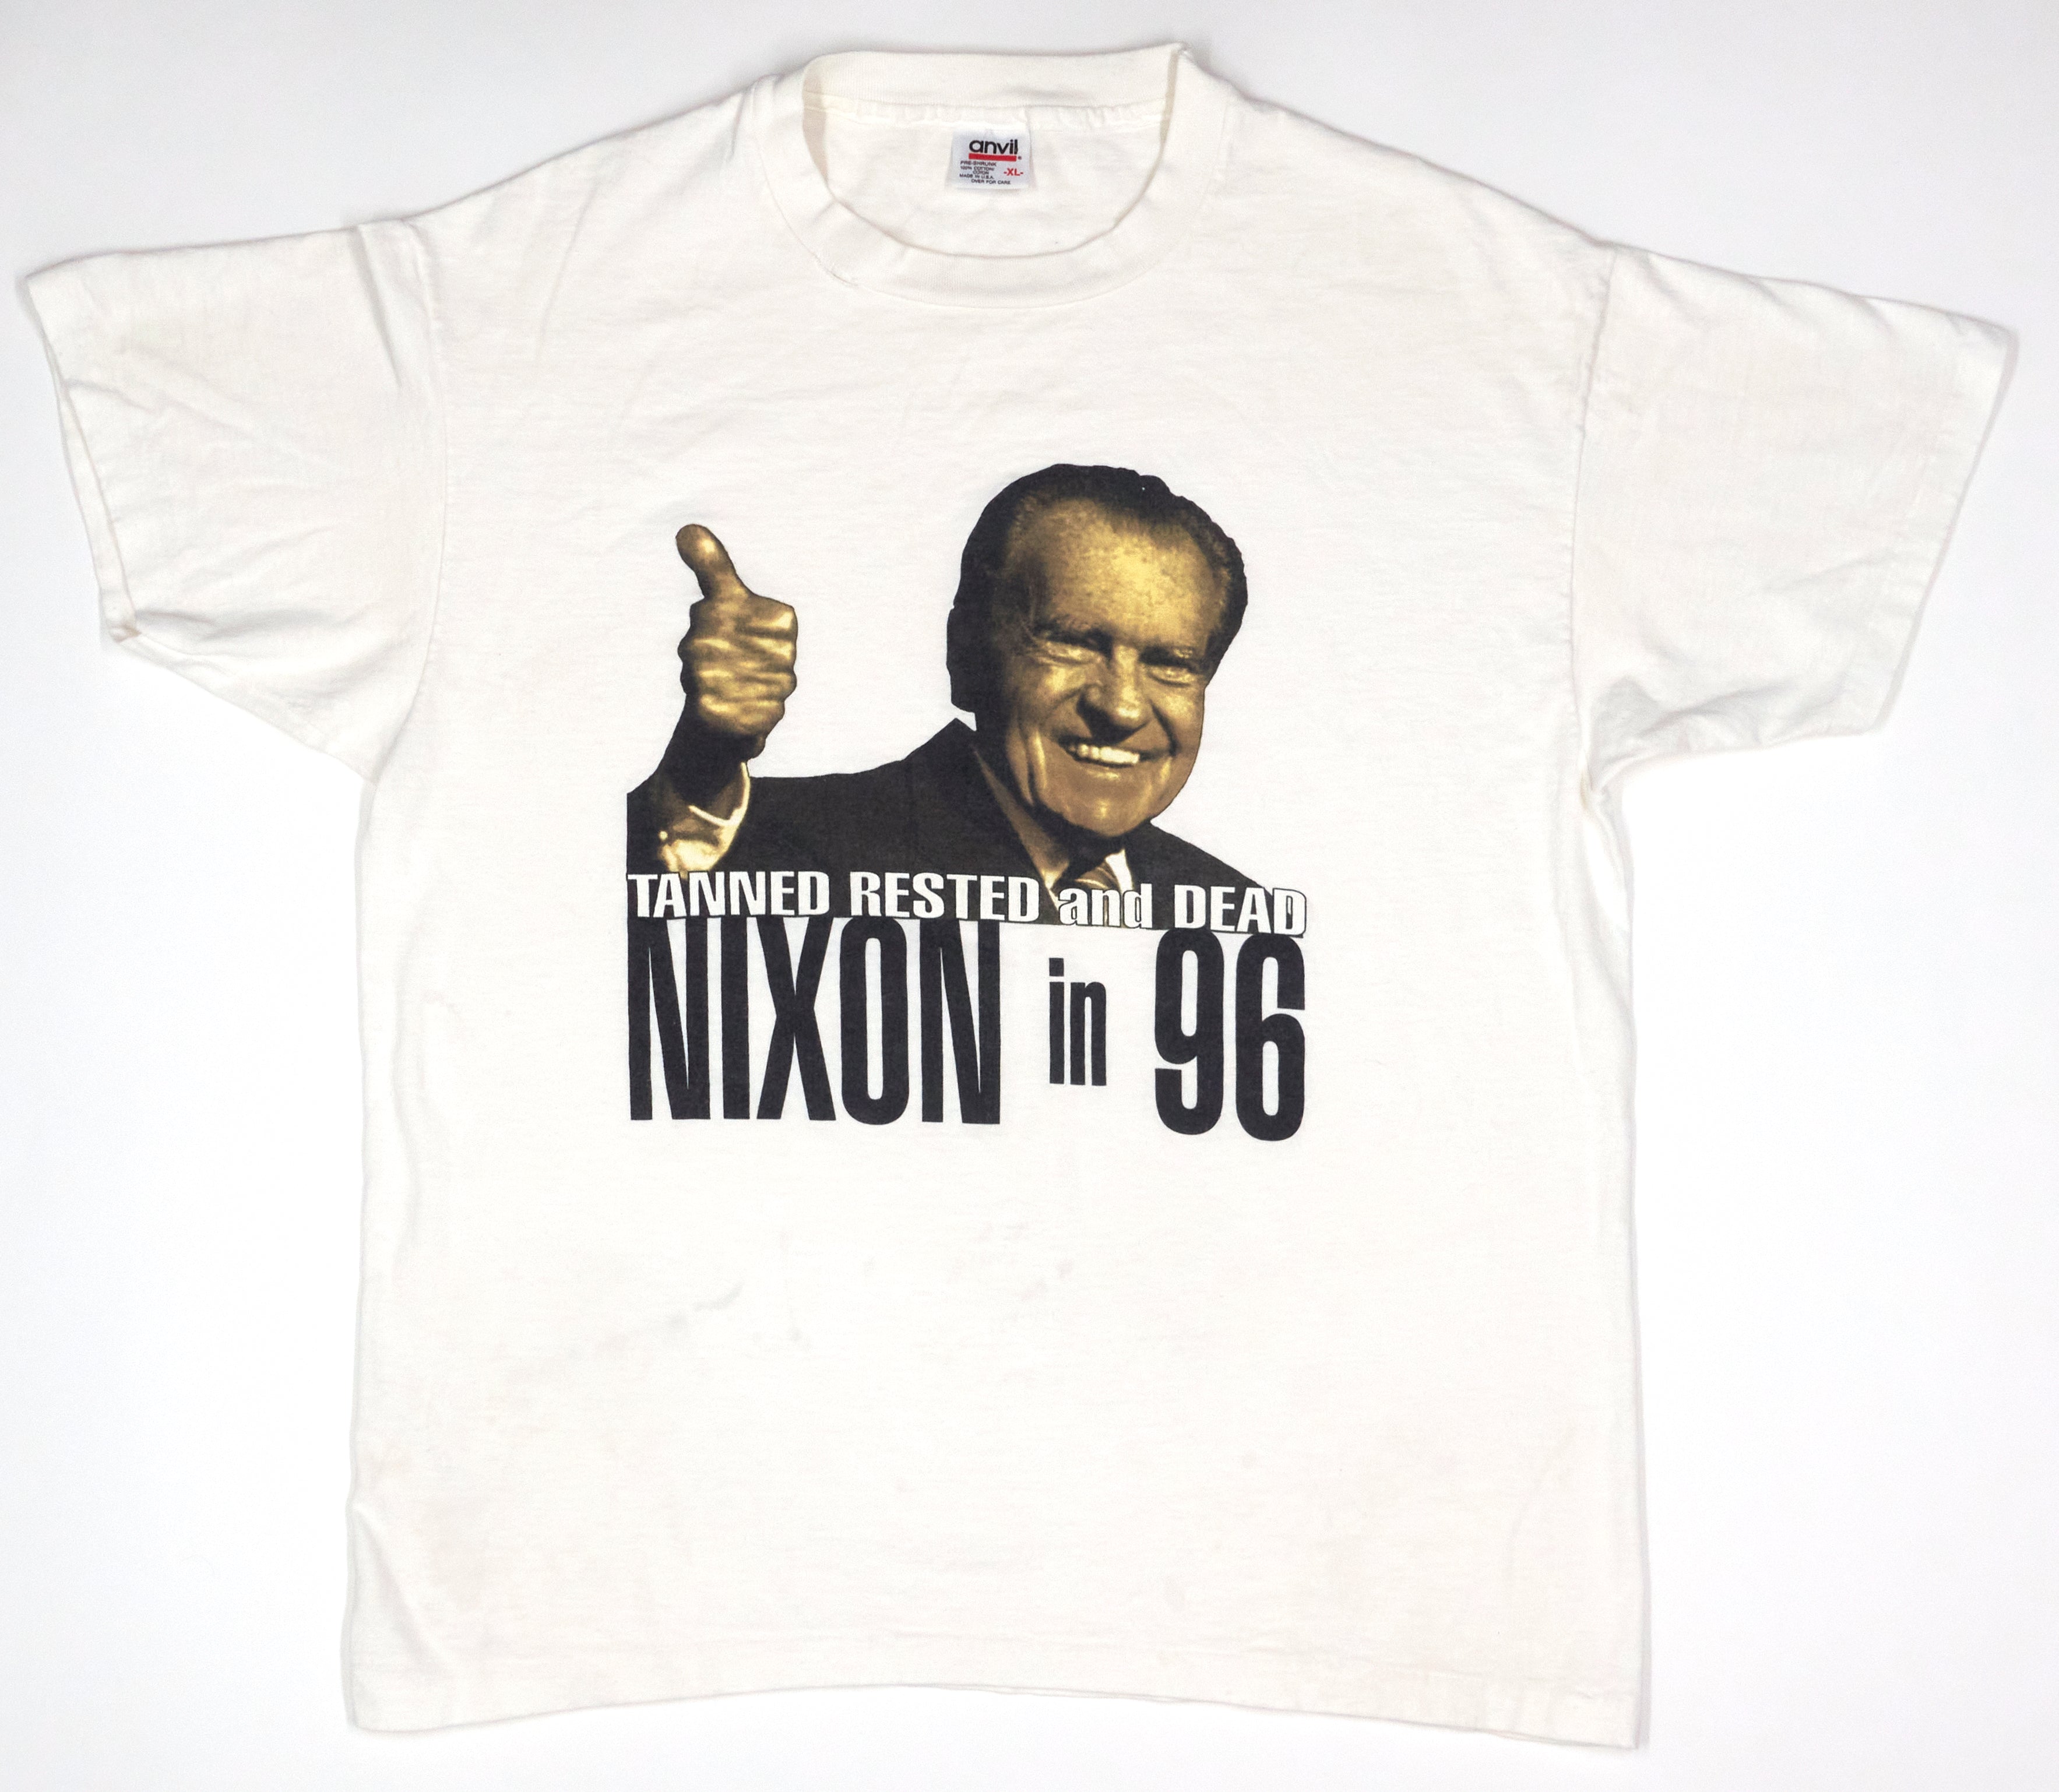 Richard Nixon - Tanned Rested and Dead Nixon in '96 Shirt Size XL